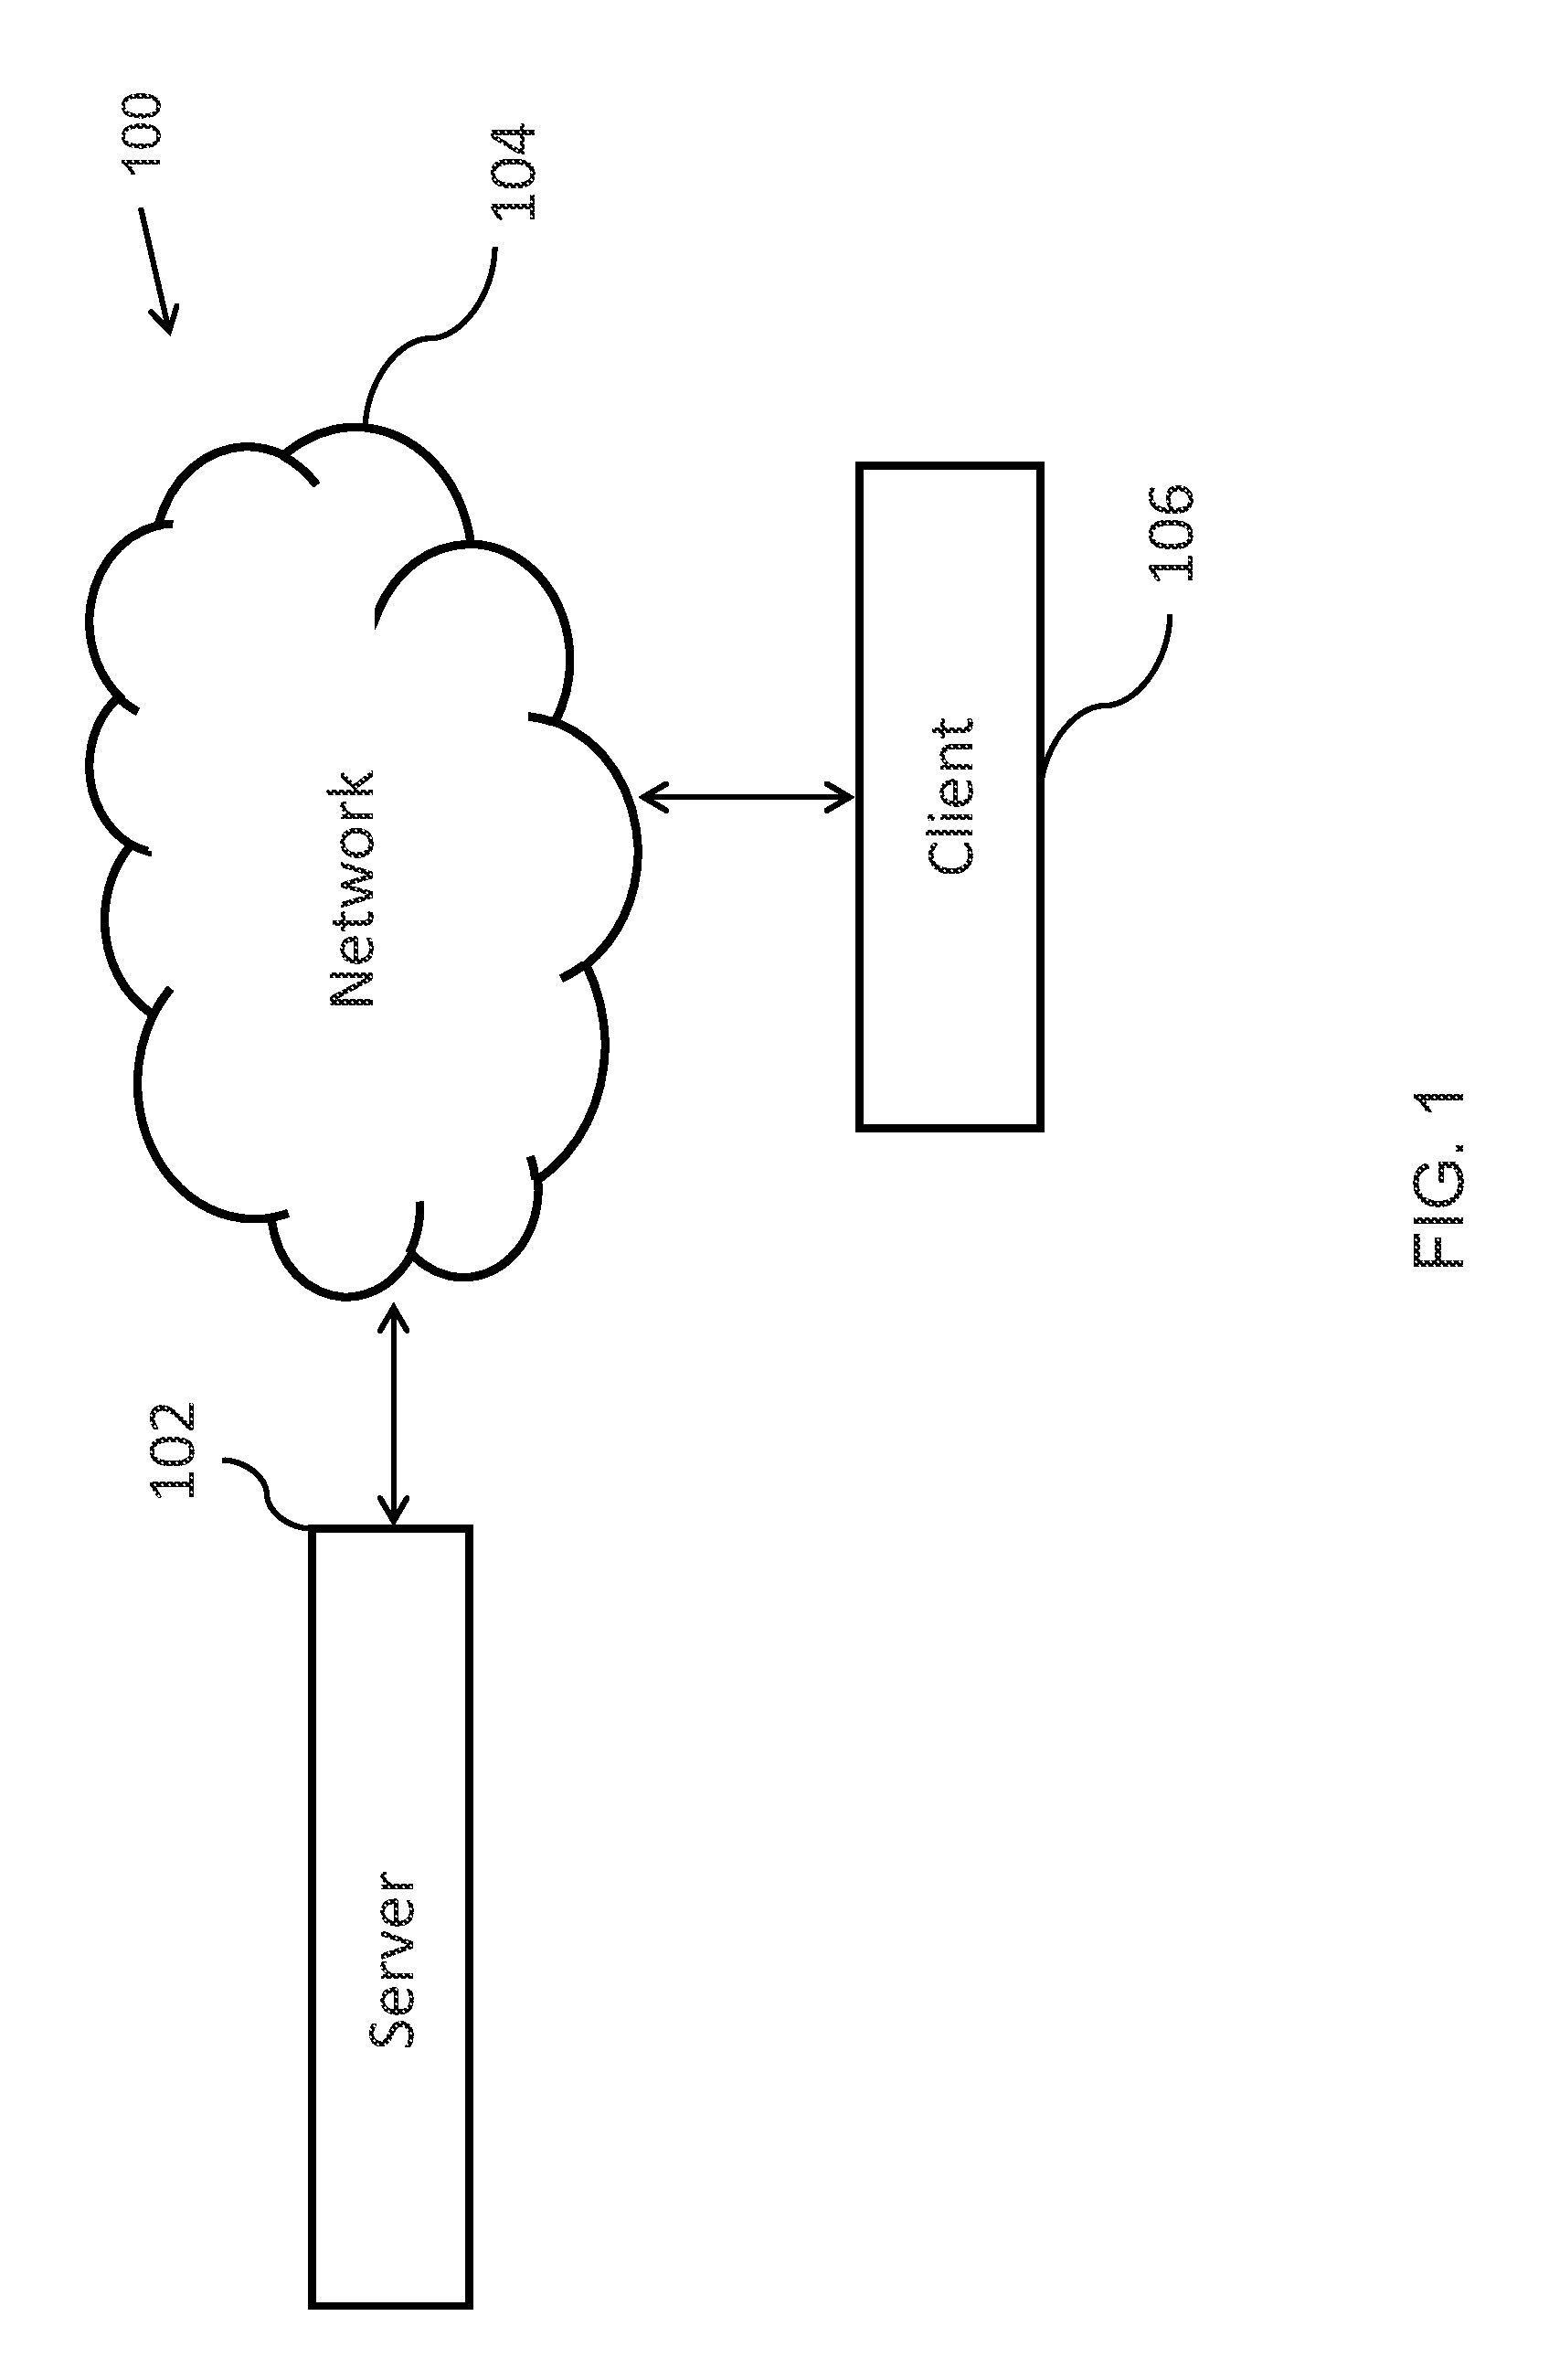 System and method for system integration